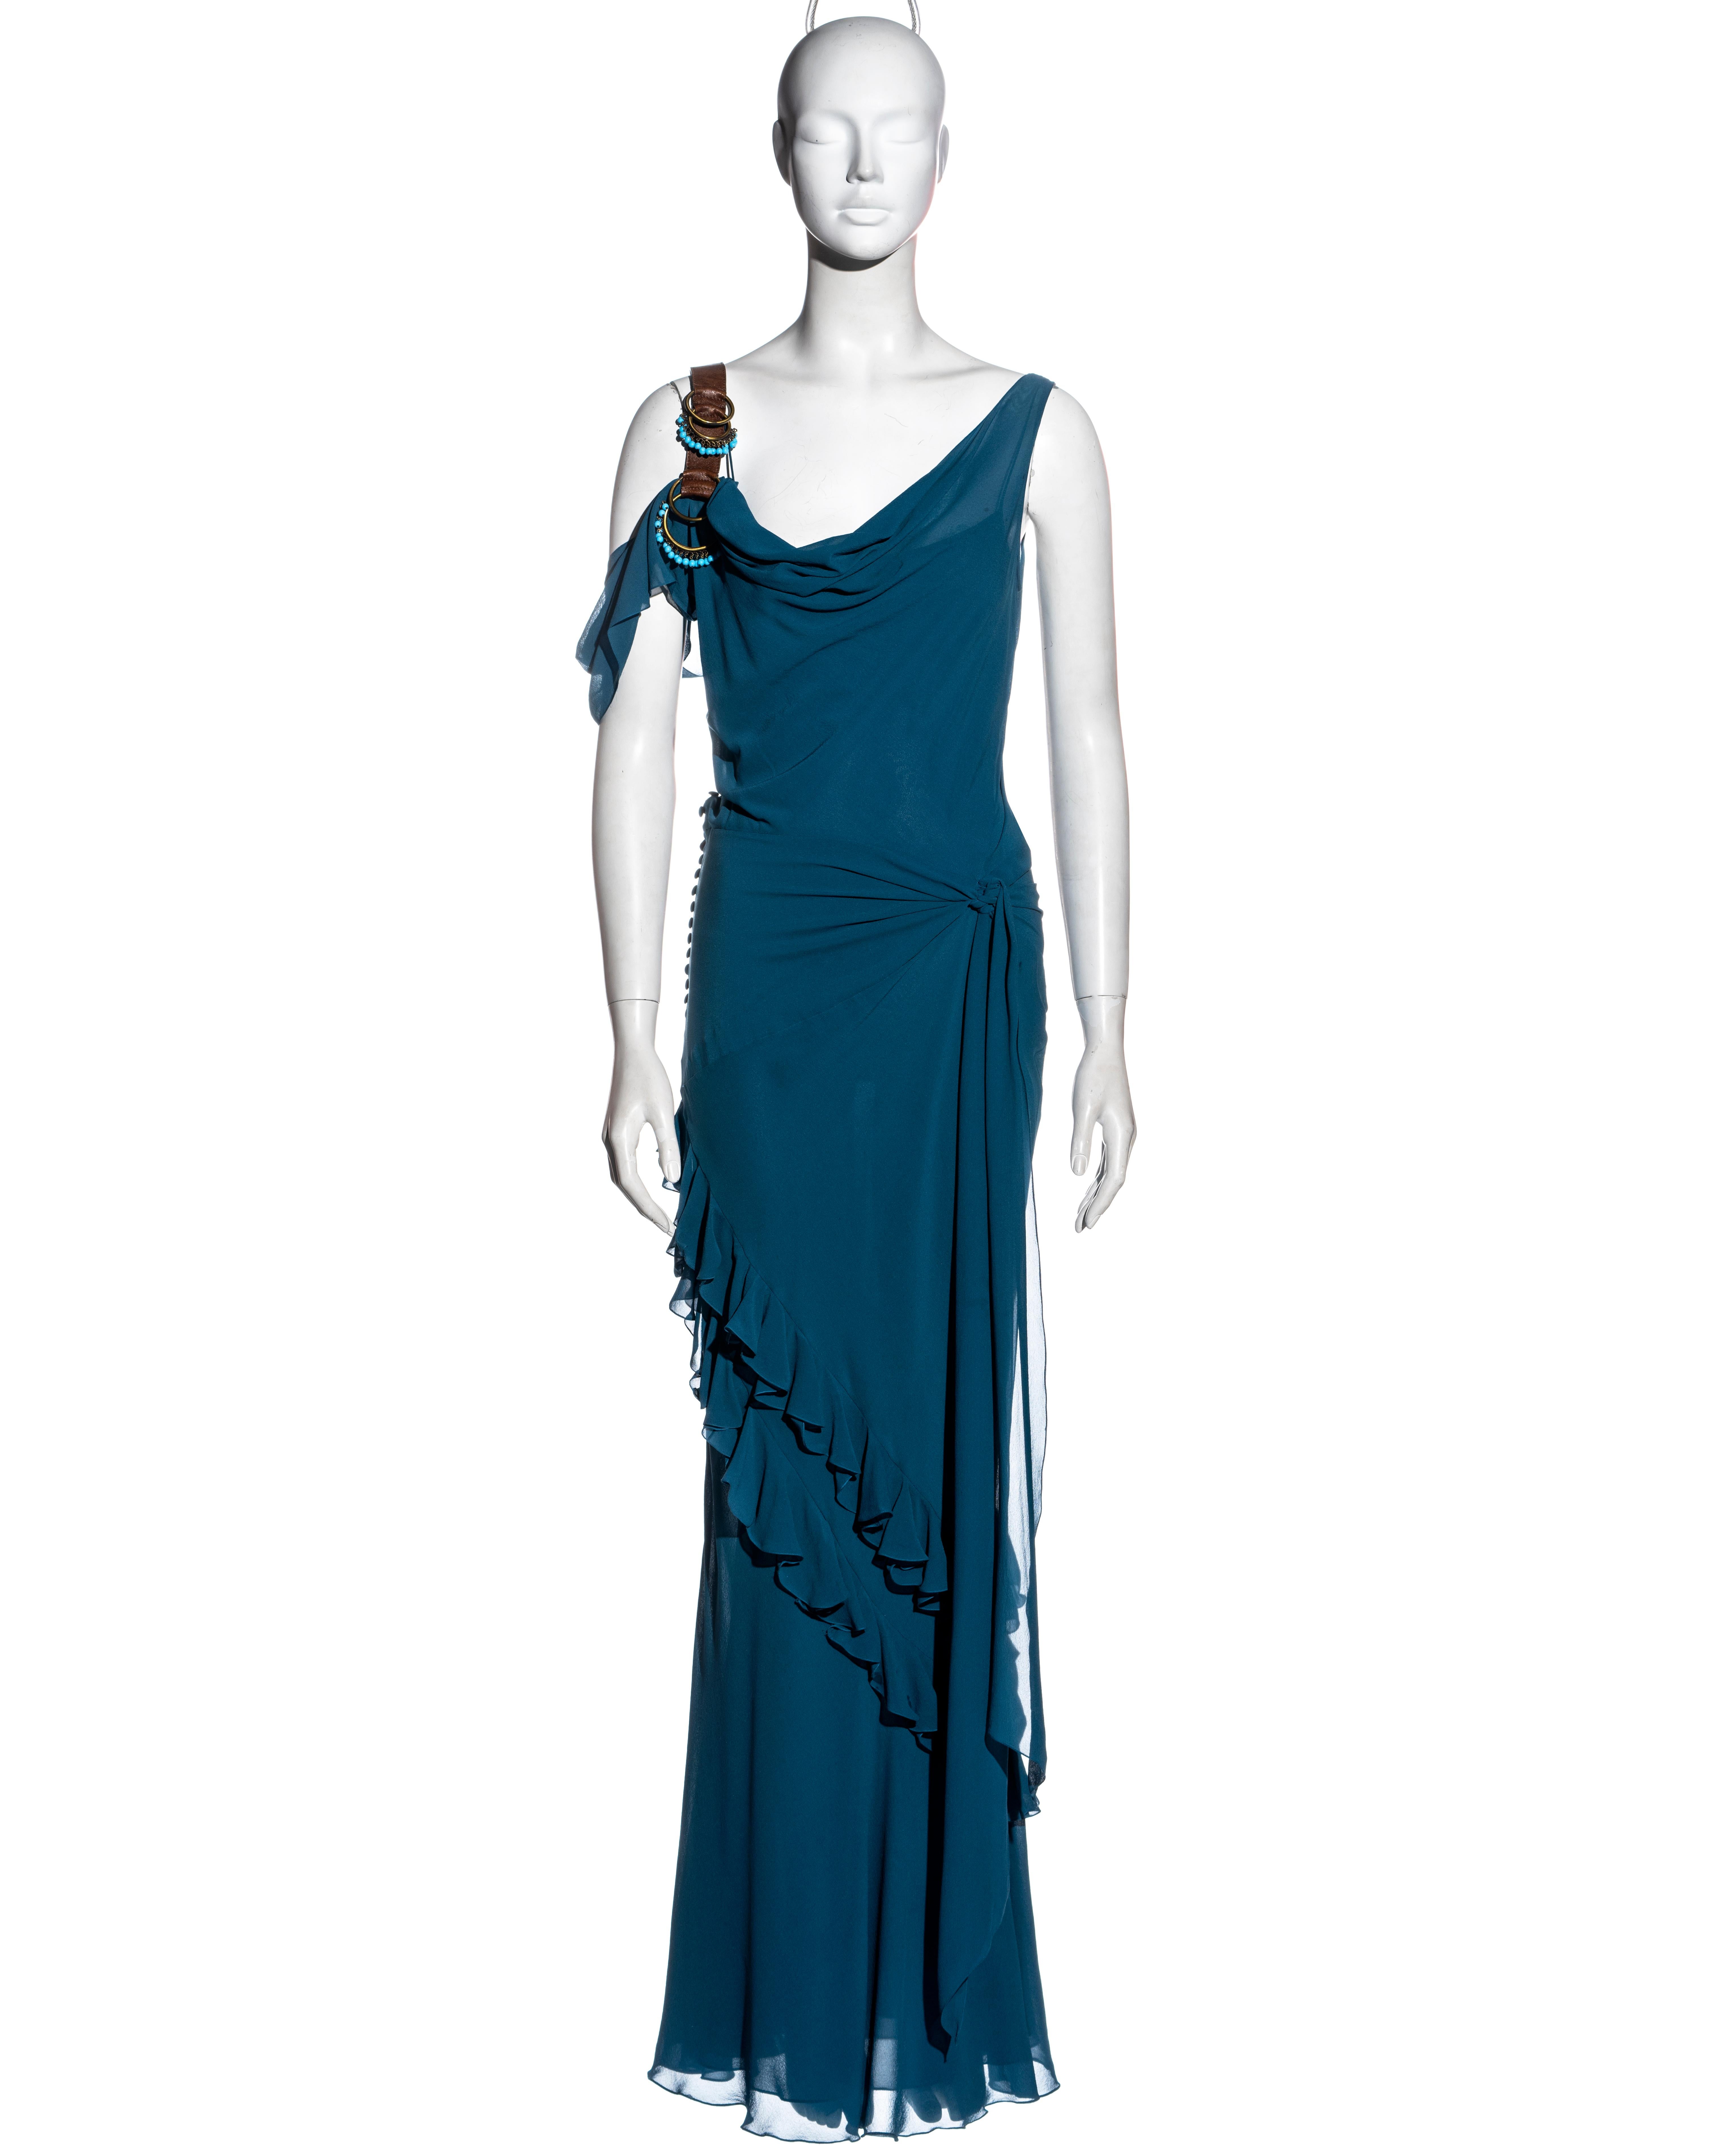 ▪ John Galliano blue silk floor-length evening dress
▪ Cowl neck 
▪ Off-shoulder 
▪ Brass hoops with turquoise beads on the brown leather shoulder strap
▪ Two ties knot at the waist 
▪ Frilled floor-length skirt 
▪ Fabric buttons at the side seam